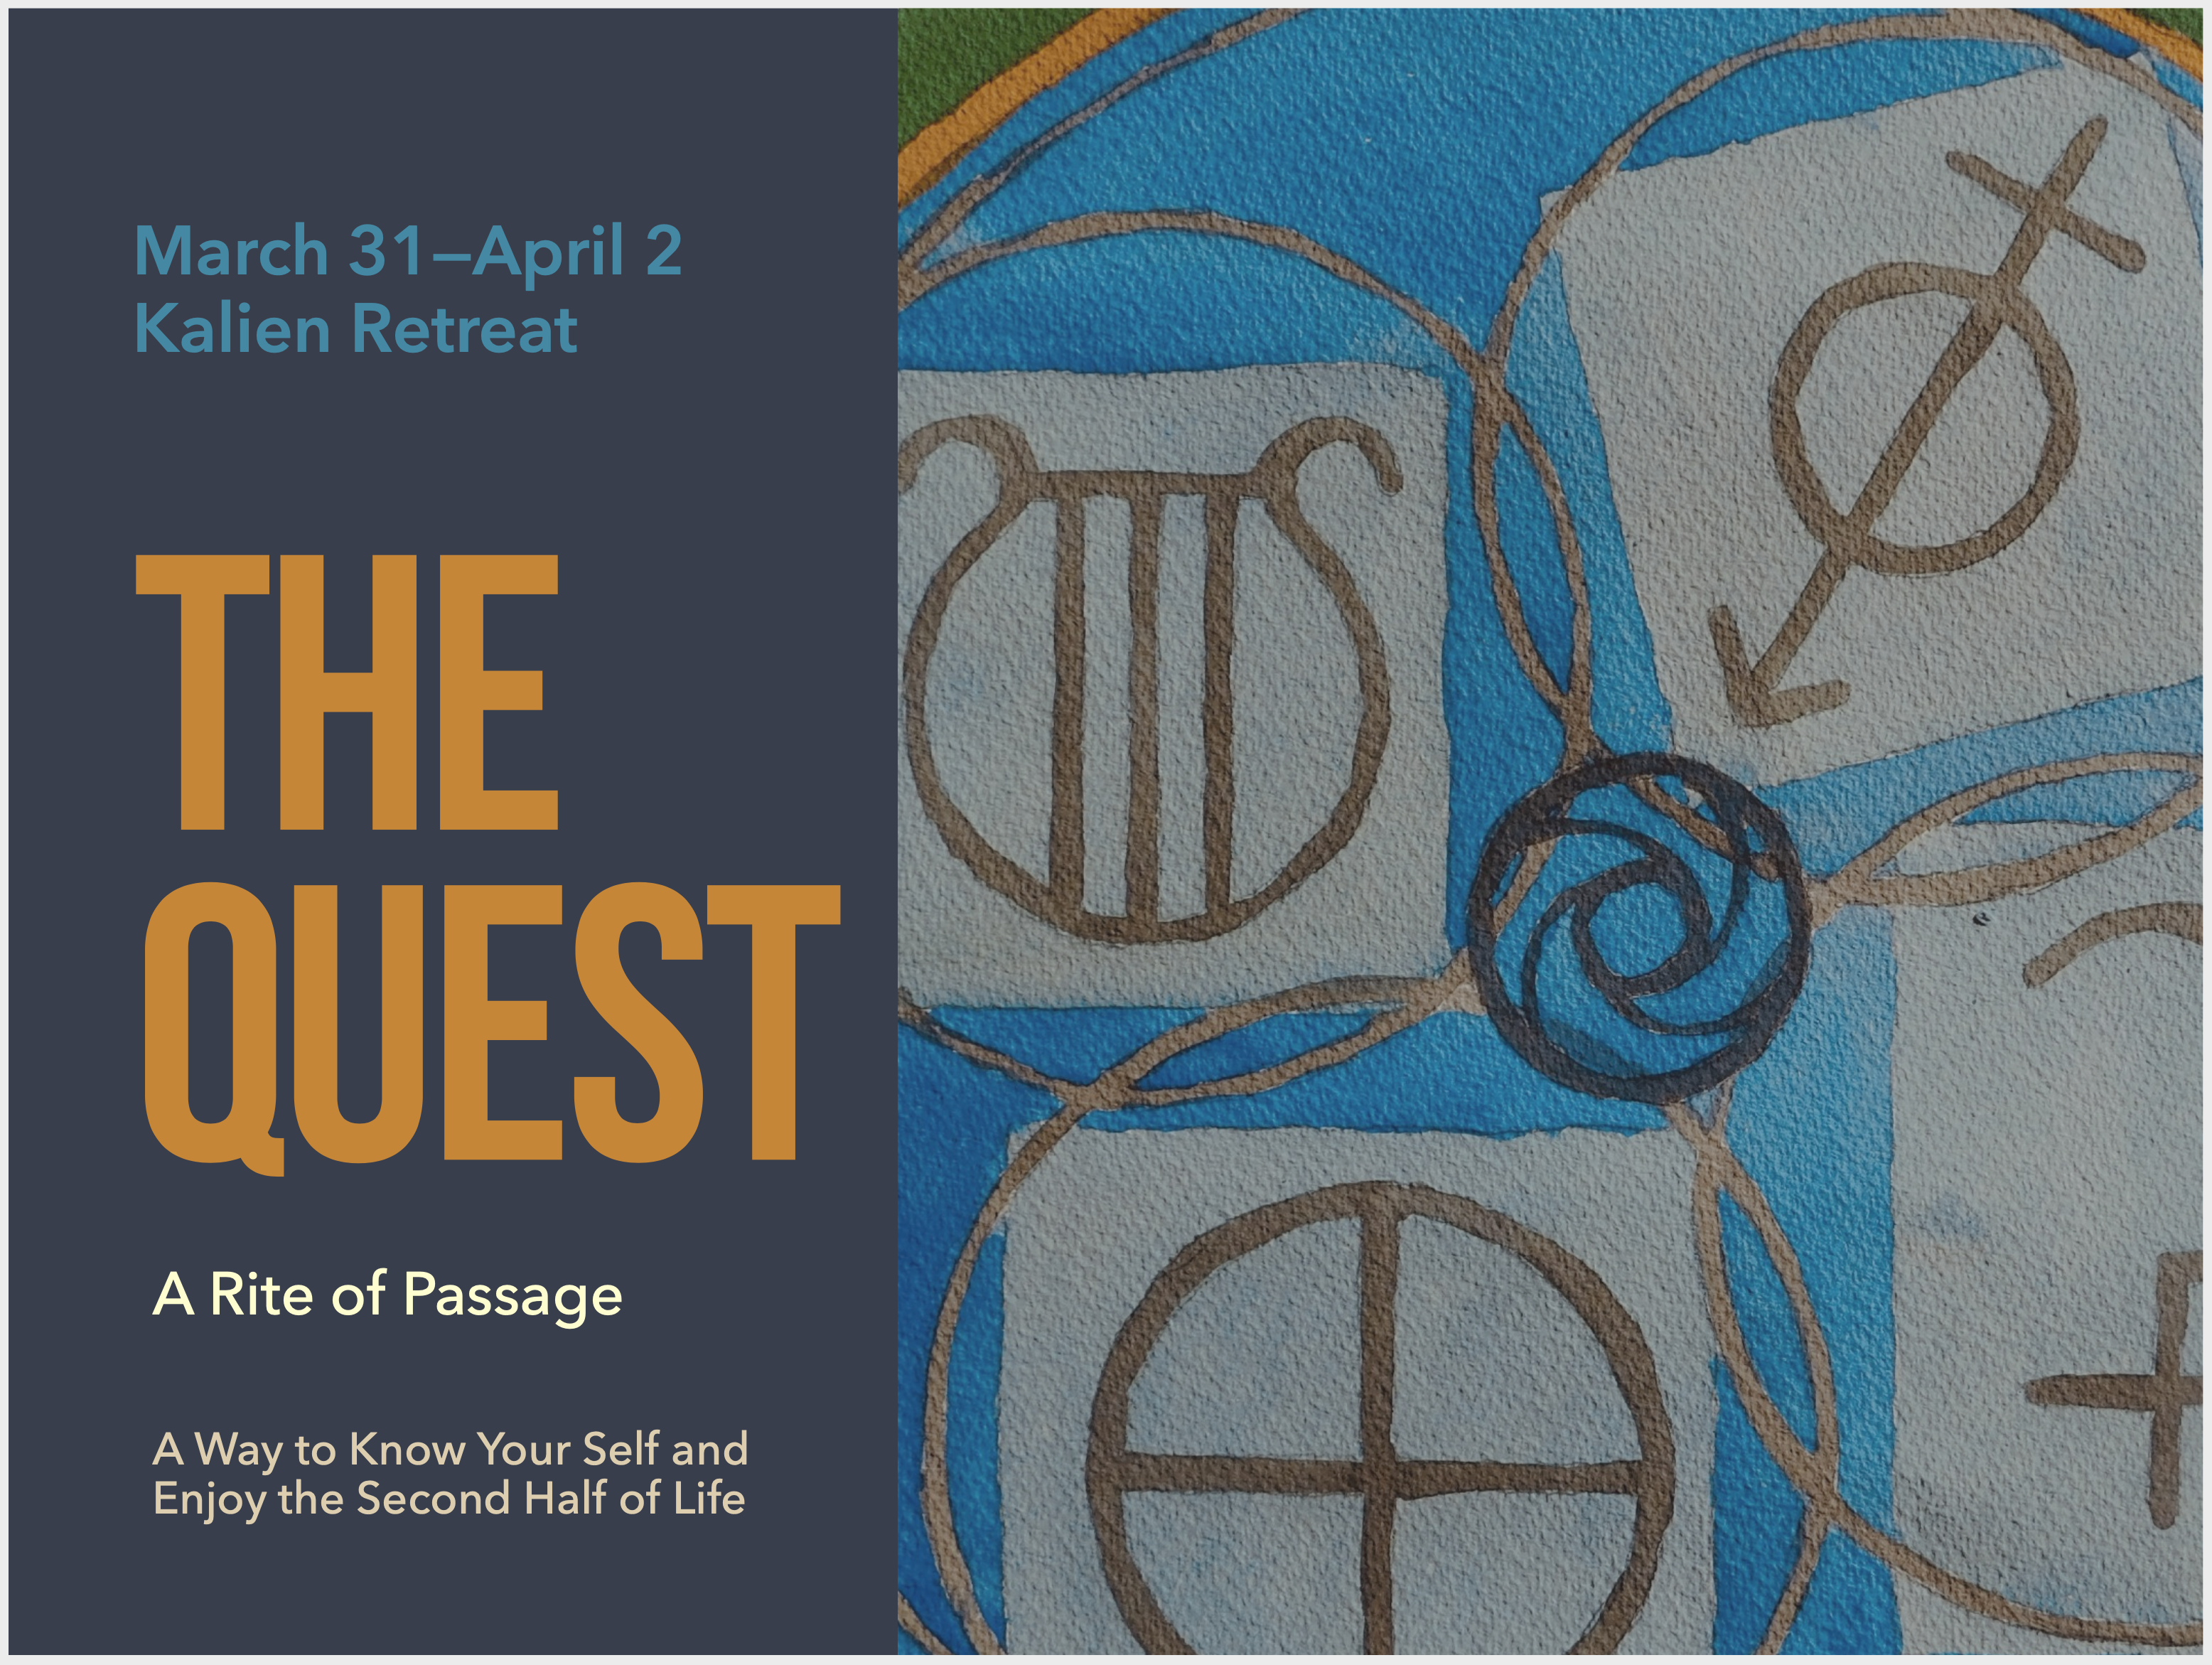 The Quest (A Rite of Passage to Know Your Self and Enjoy the Second Half of Life) Open to Anyone Age 35 and Up